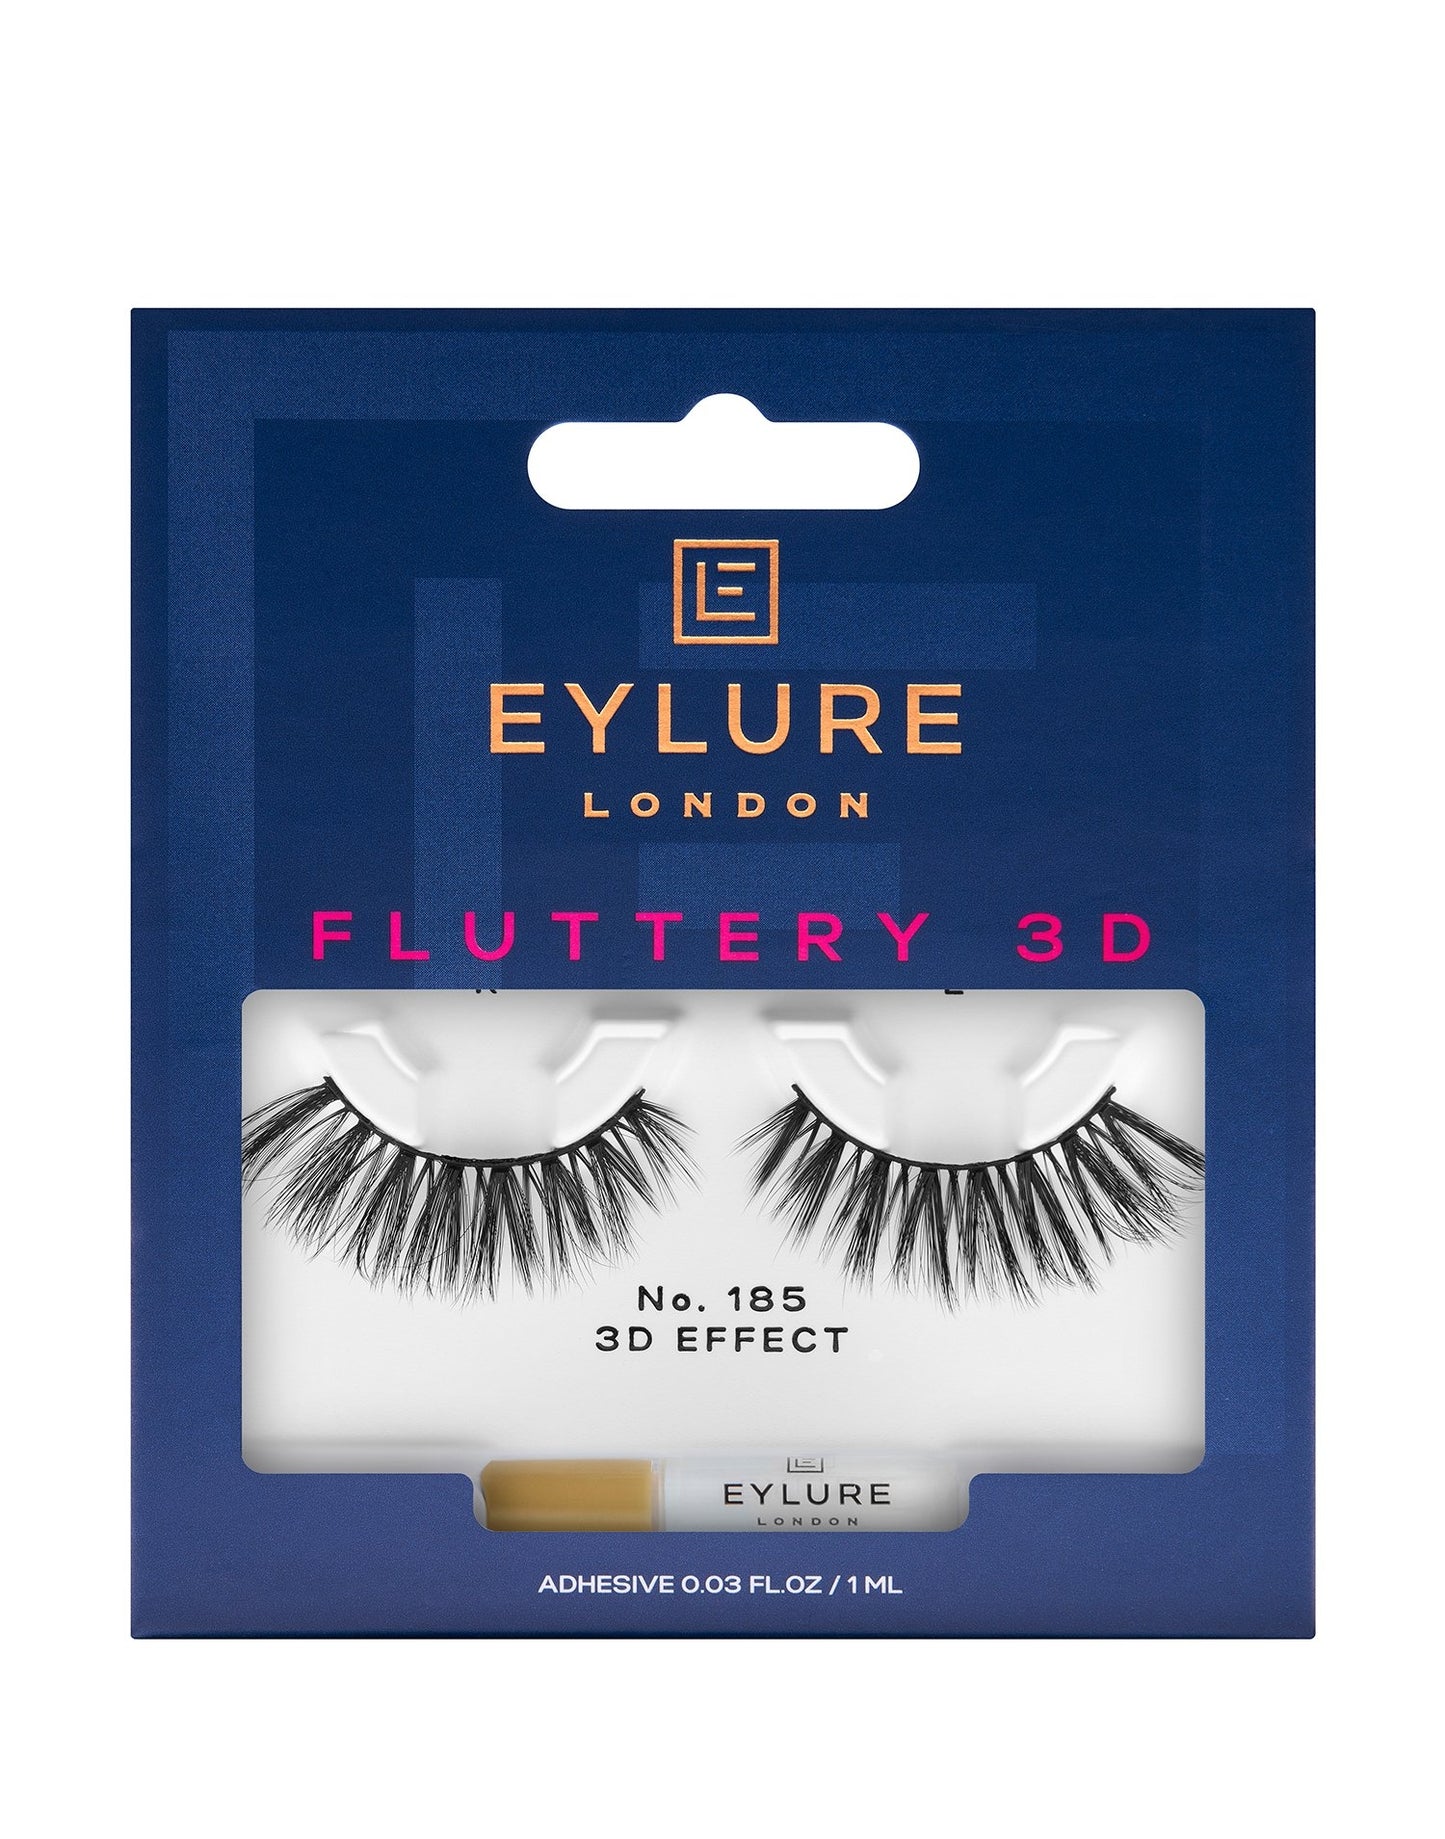 Eylure Fluttery 3D Lashes No. 185